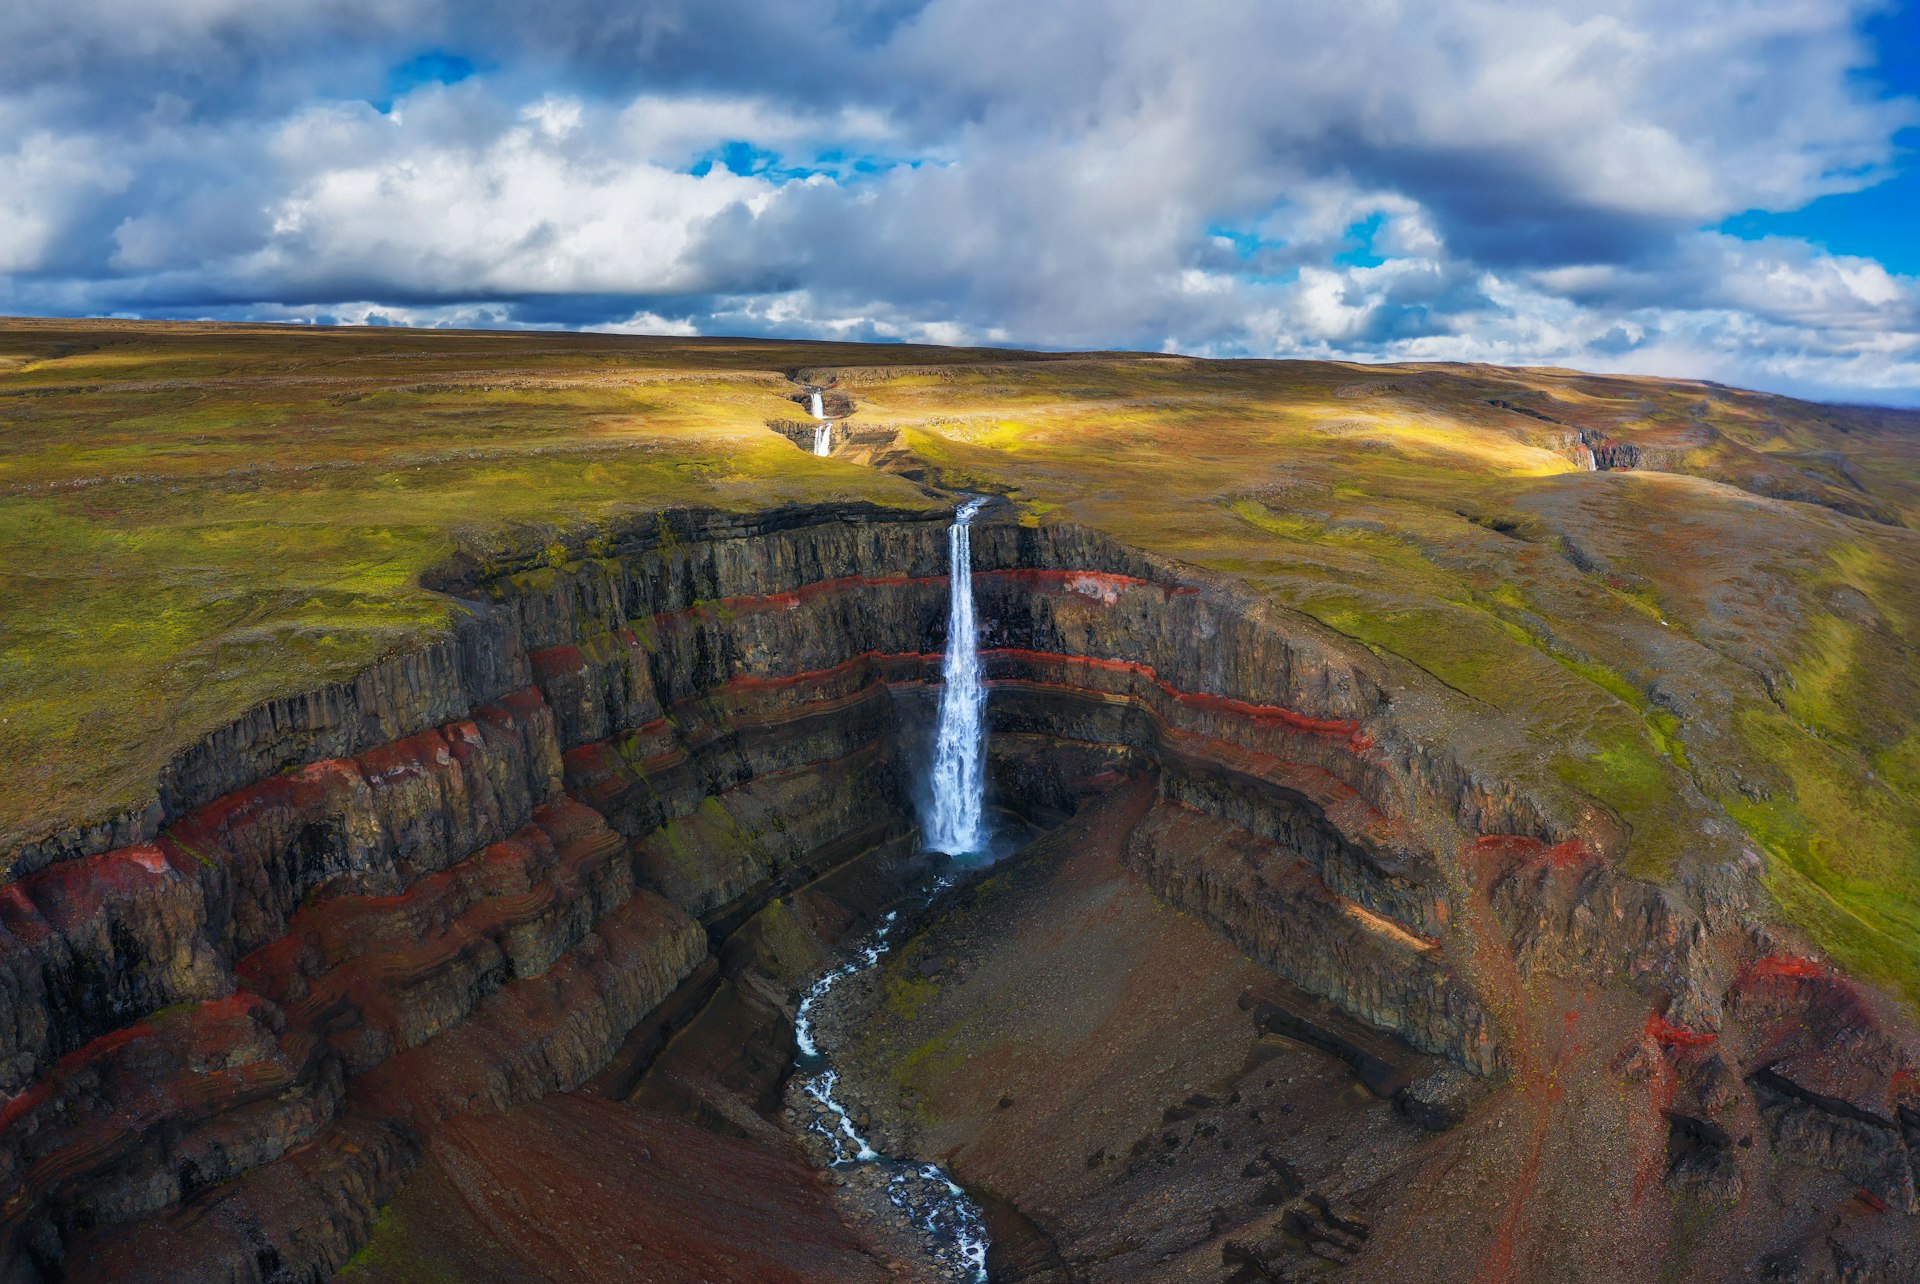 Aerial view of a high waterfall falling down into a crater with red layers of clay between the basaltic layers of rock